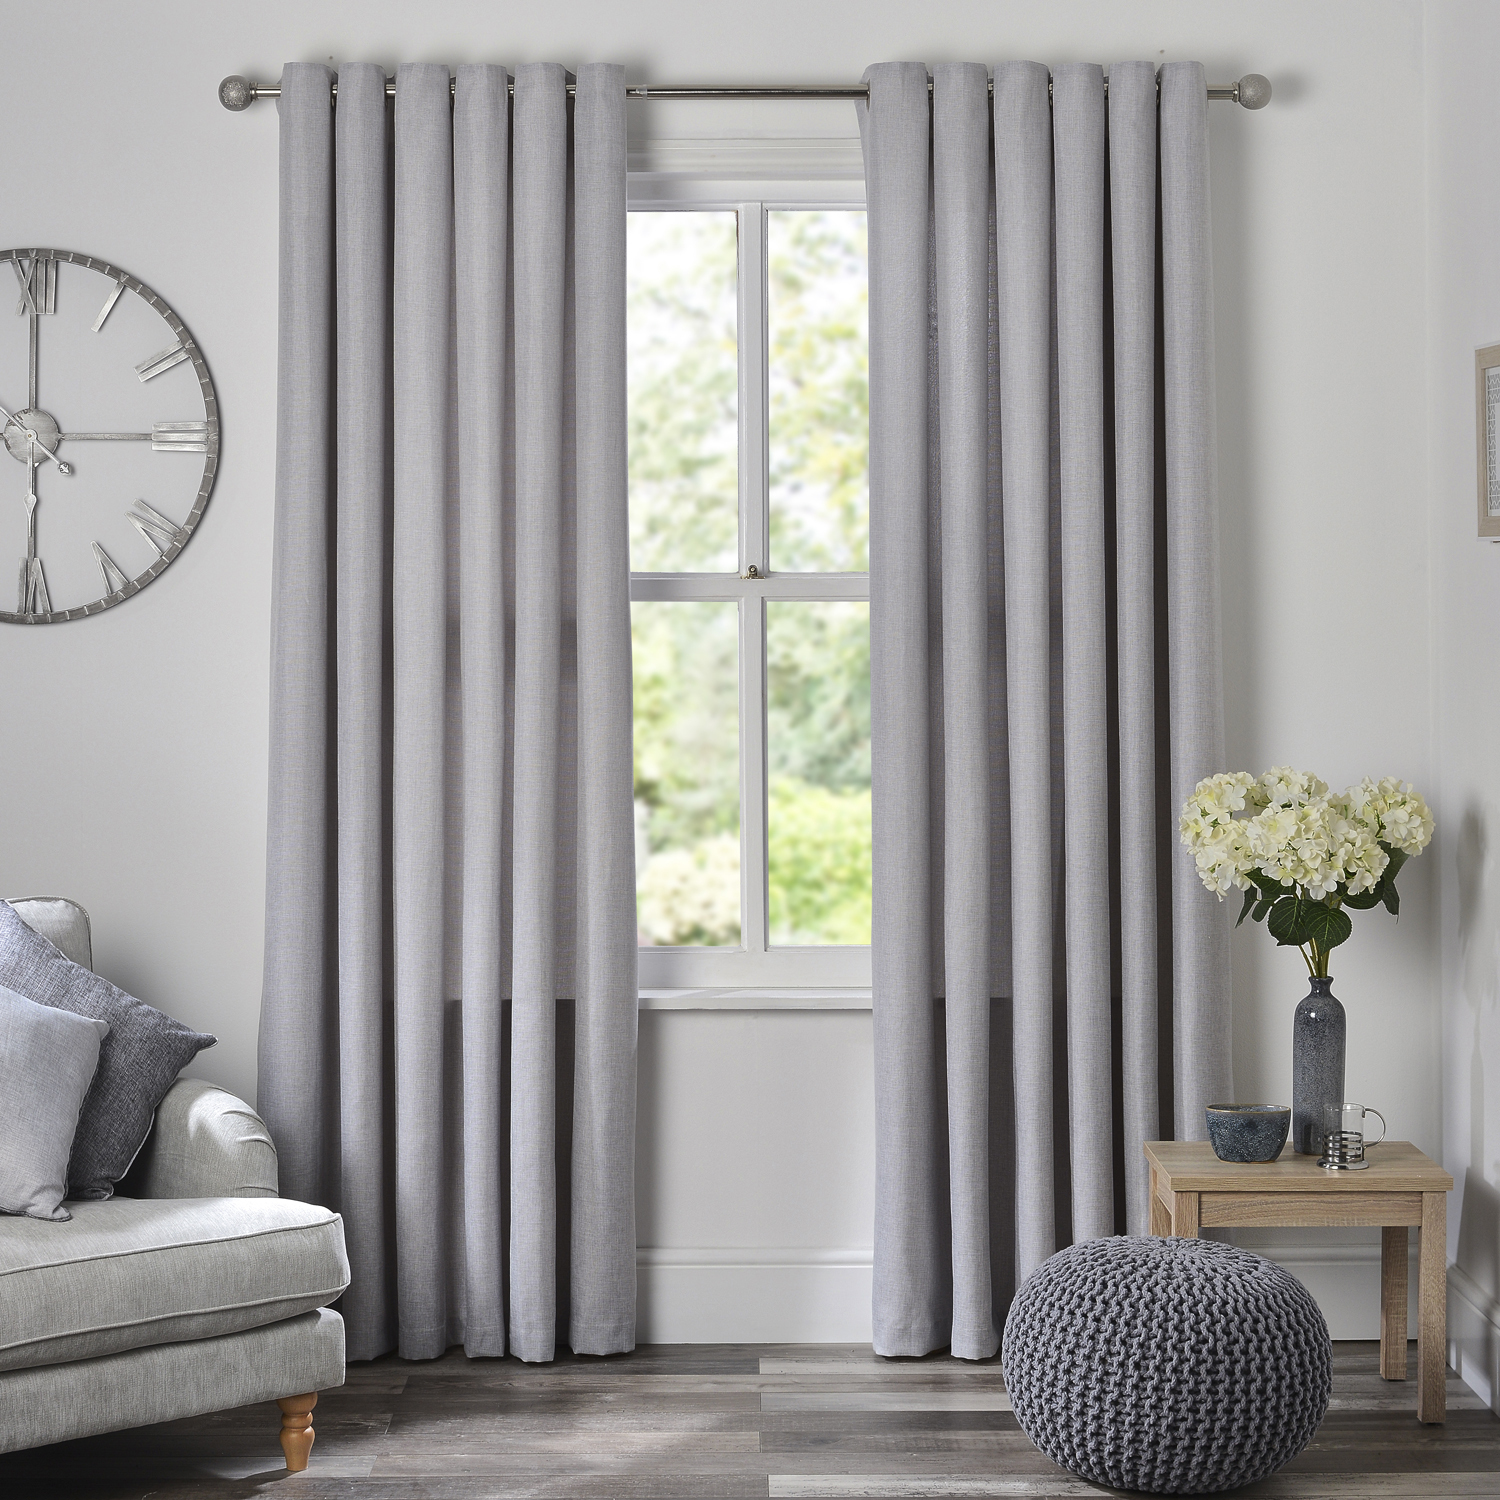 Divante Chatsworth Grey Thermal Lined Eyelet Curtains 183 x 168cm Image 1